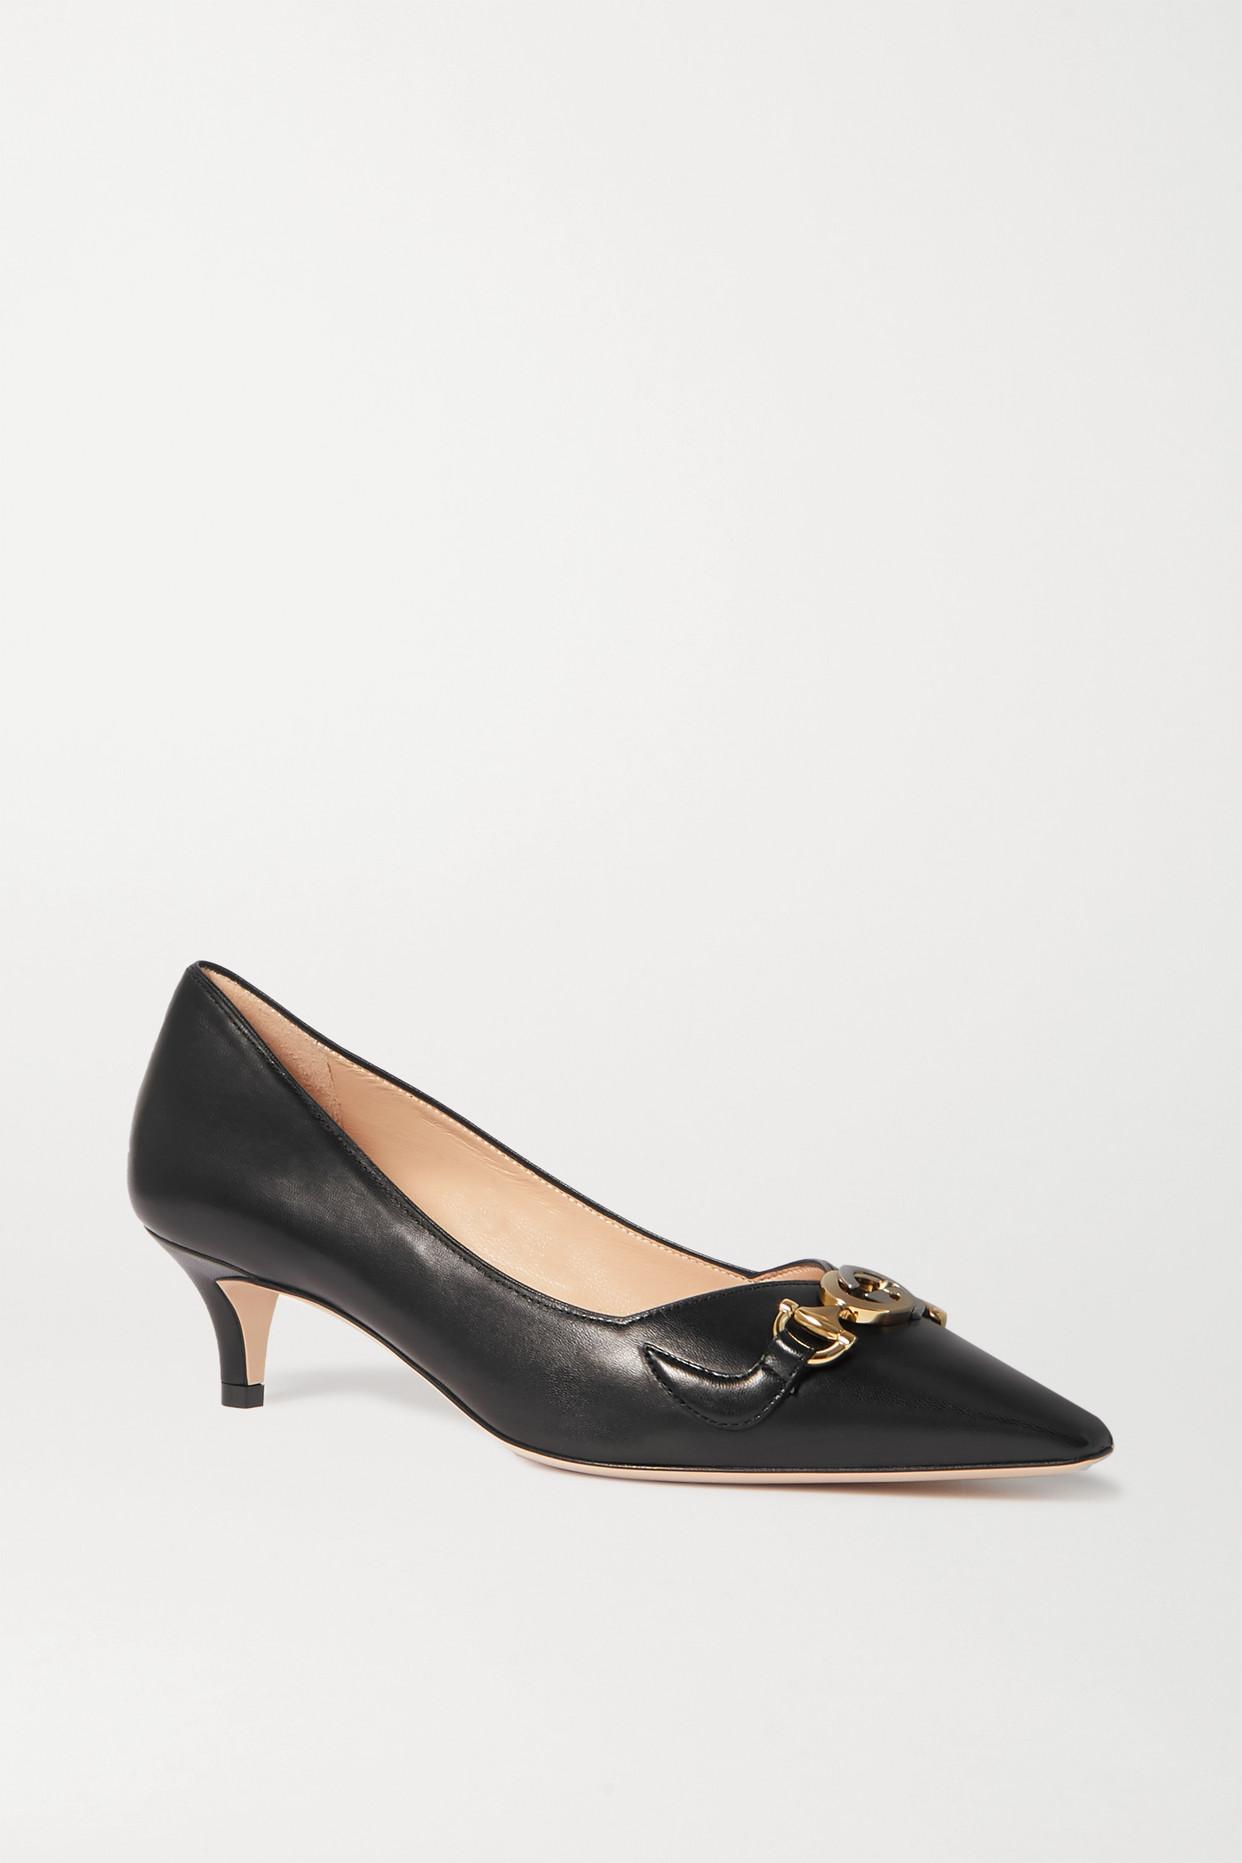 Gucci Zumi Logo-embellished Leather Pumps in Black | Lyst